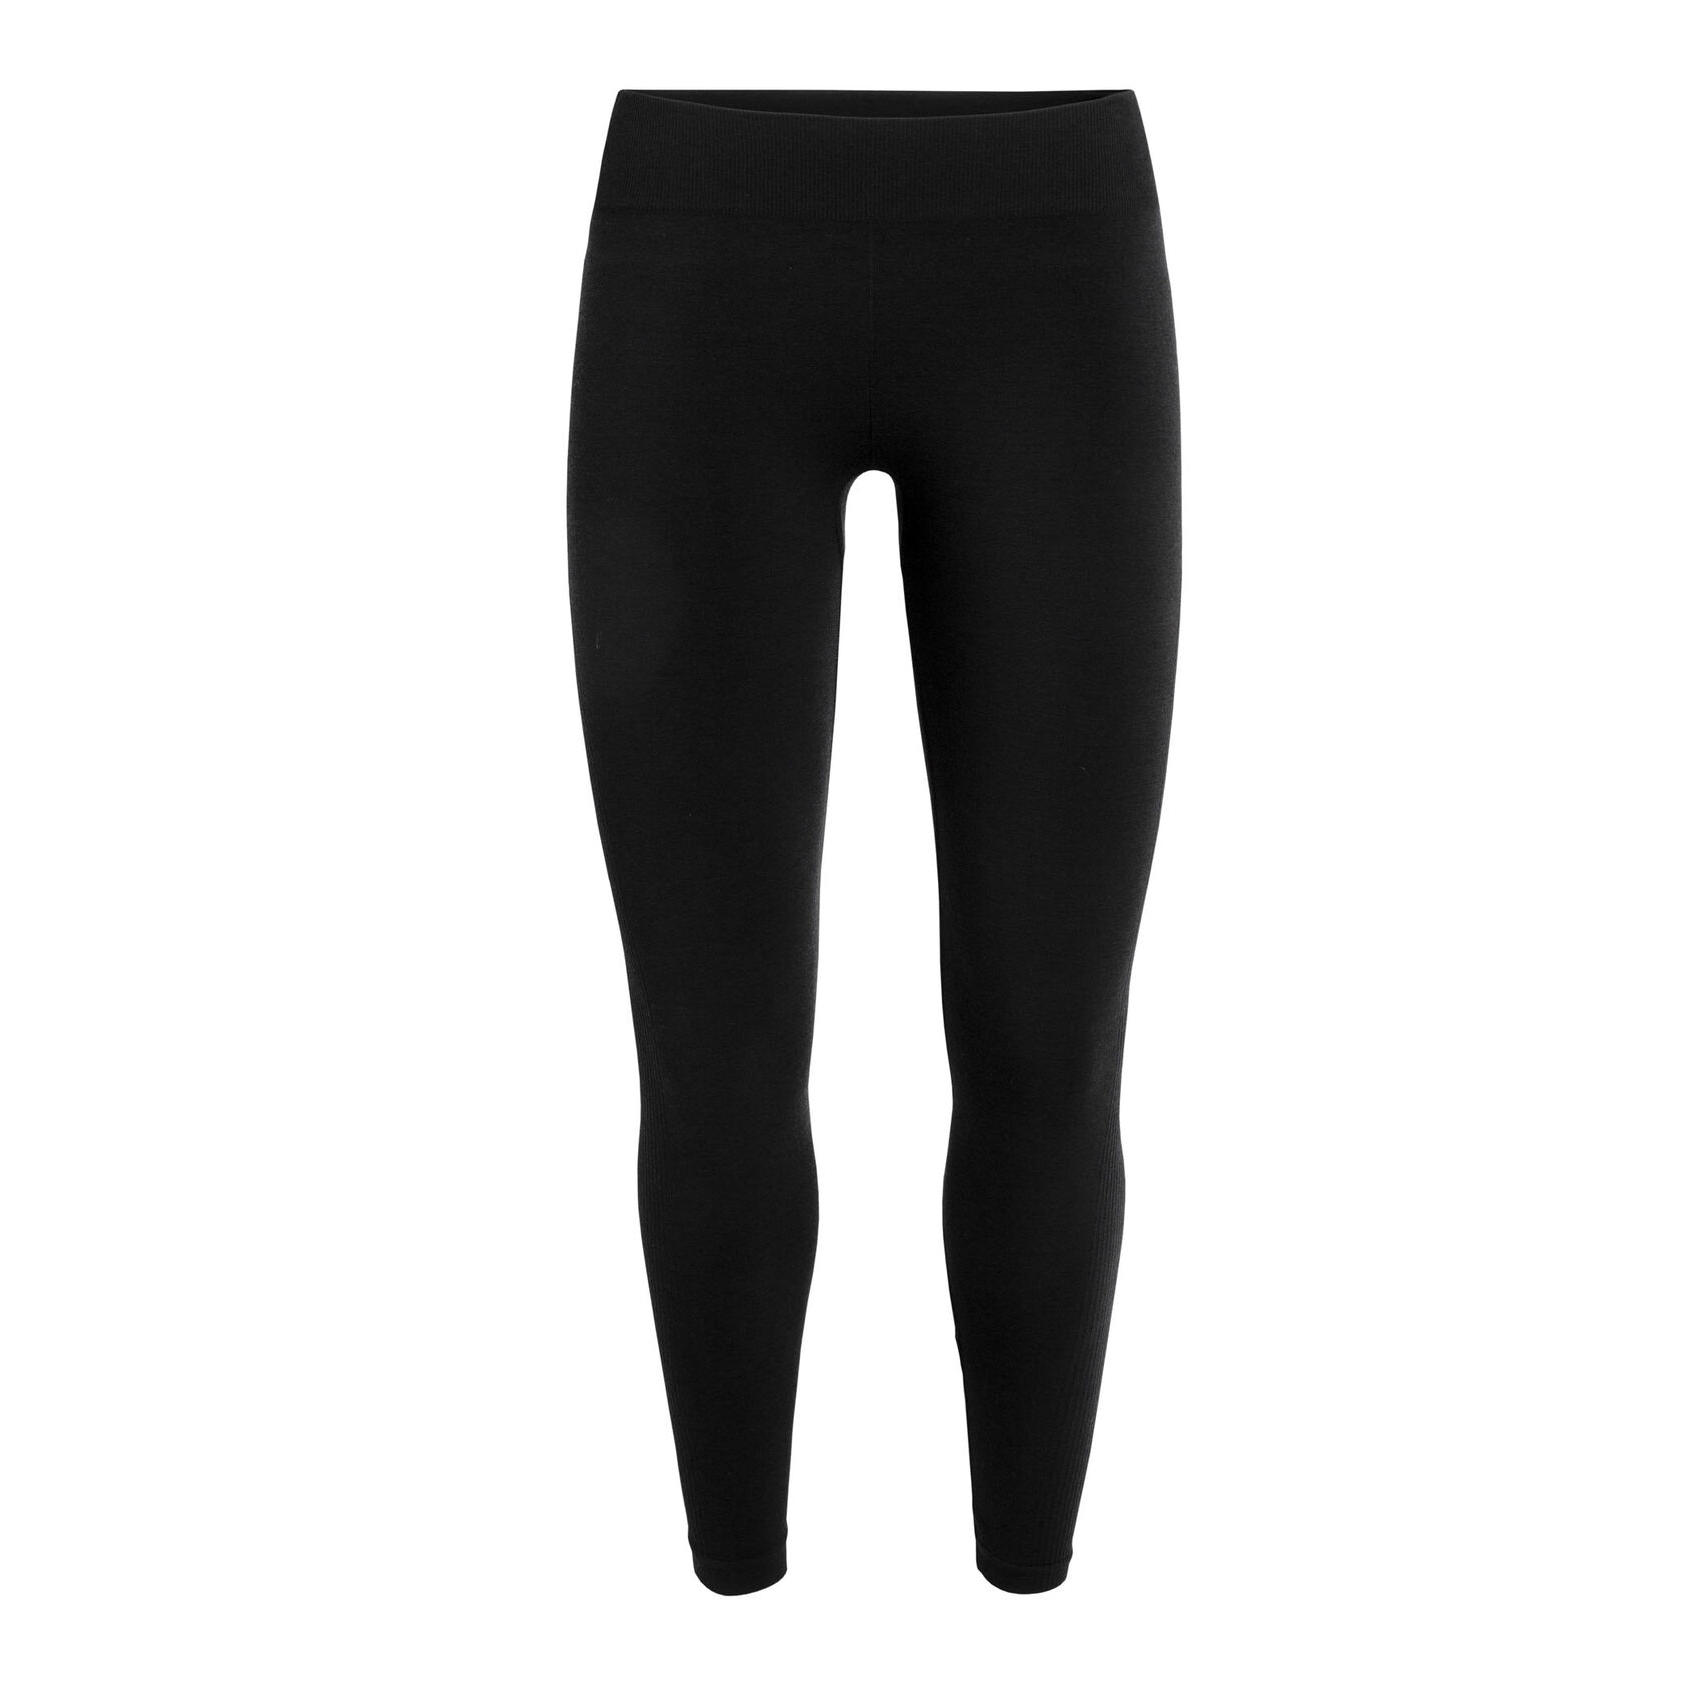 Women's Motion Seamless Tights